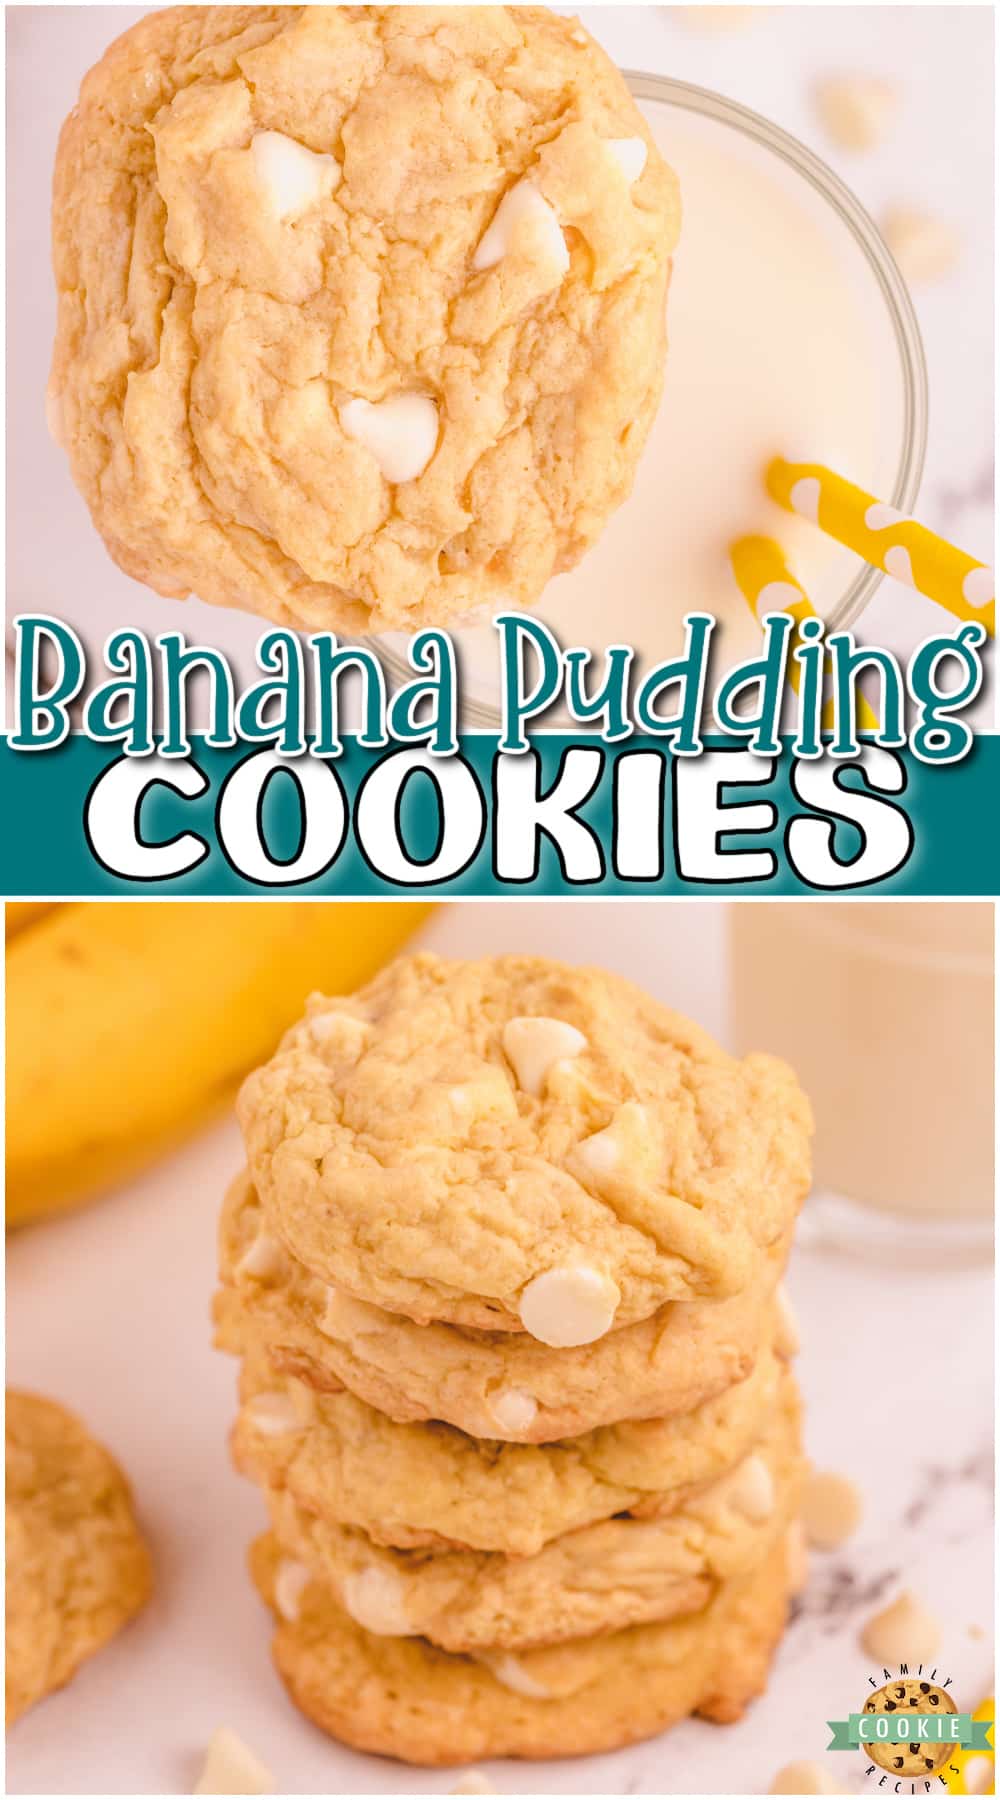 Banana Pudding Cookies made with a ripe banana for amazing pillowy soft cookies with great banana flavor! Banana cream cookies with pudding mix & white chocolate chips are delicious! via @buttergirls